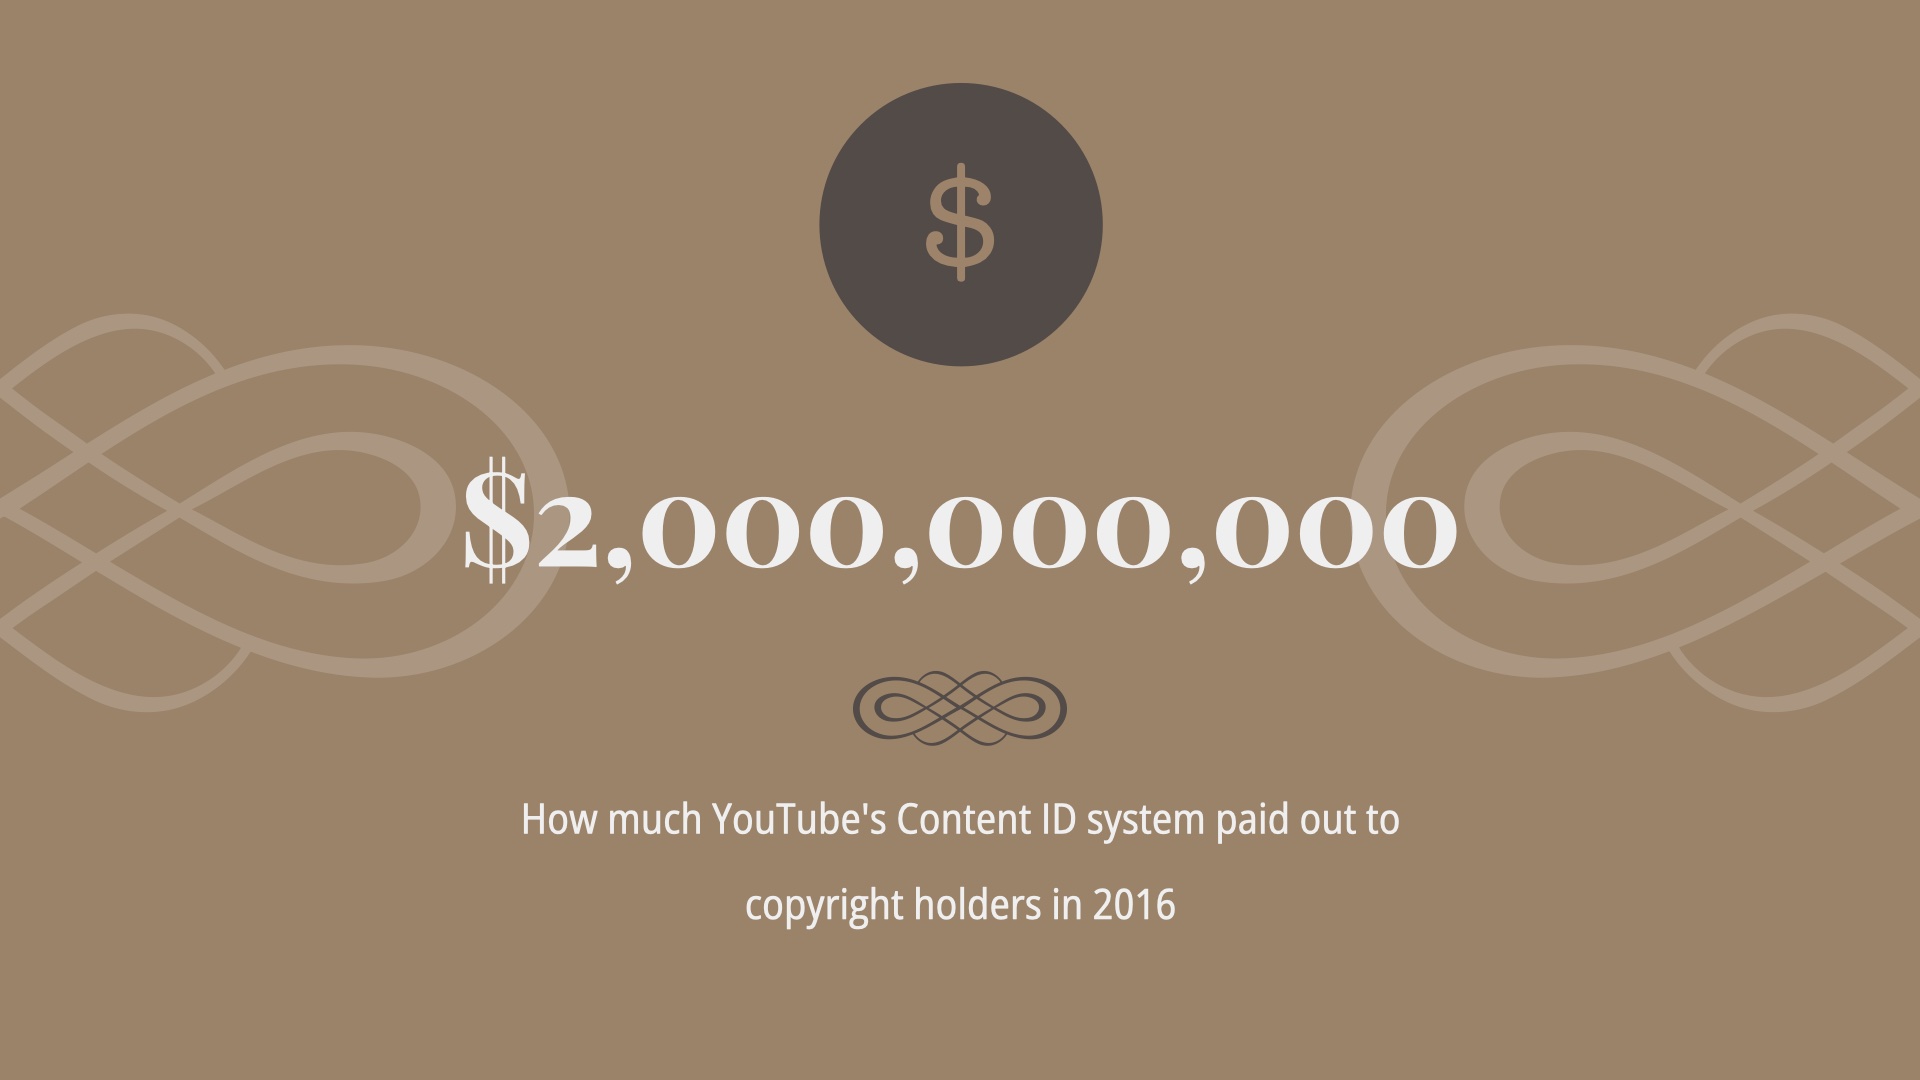 Title Card: YouTube's Content ID system paid out 2 billion to copyright holders in 2016